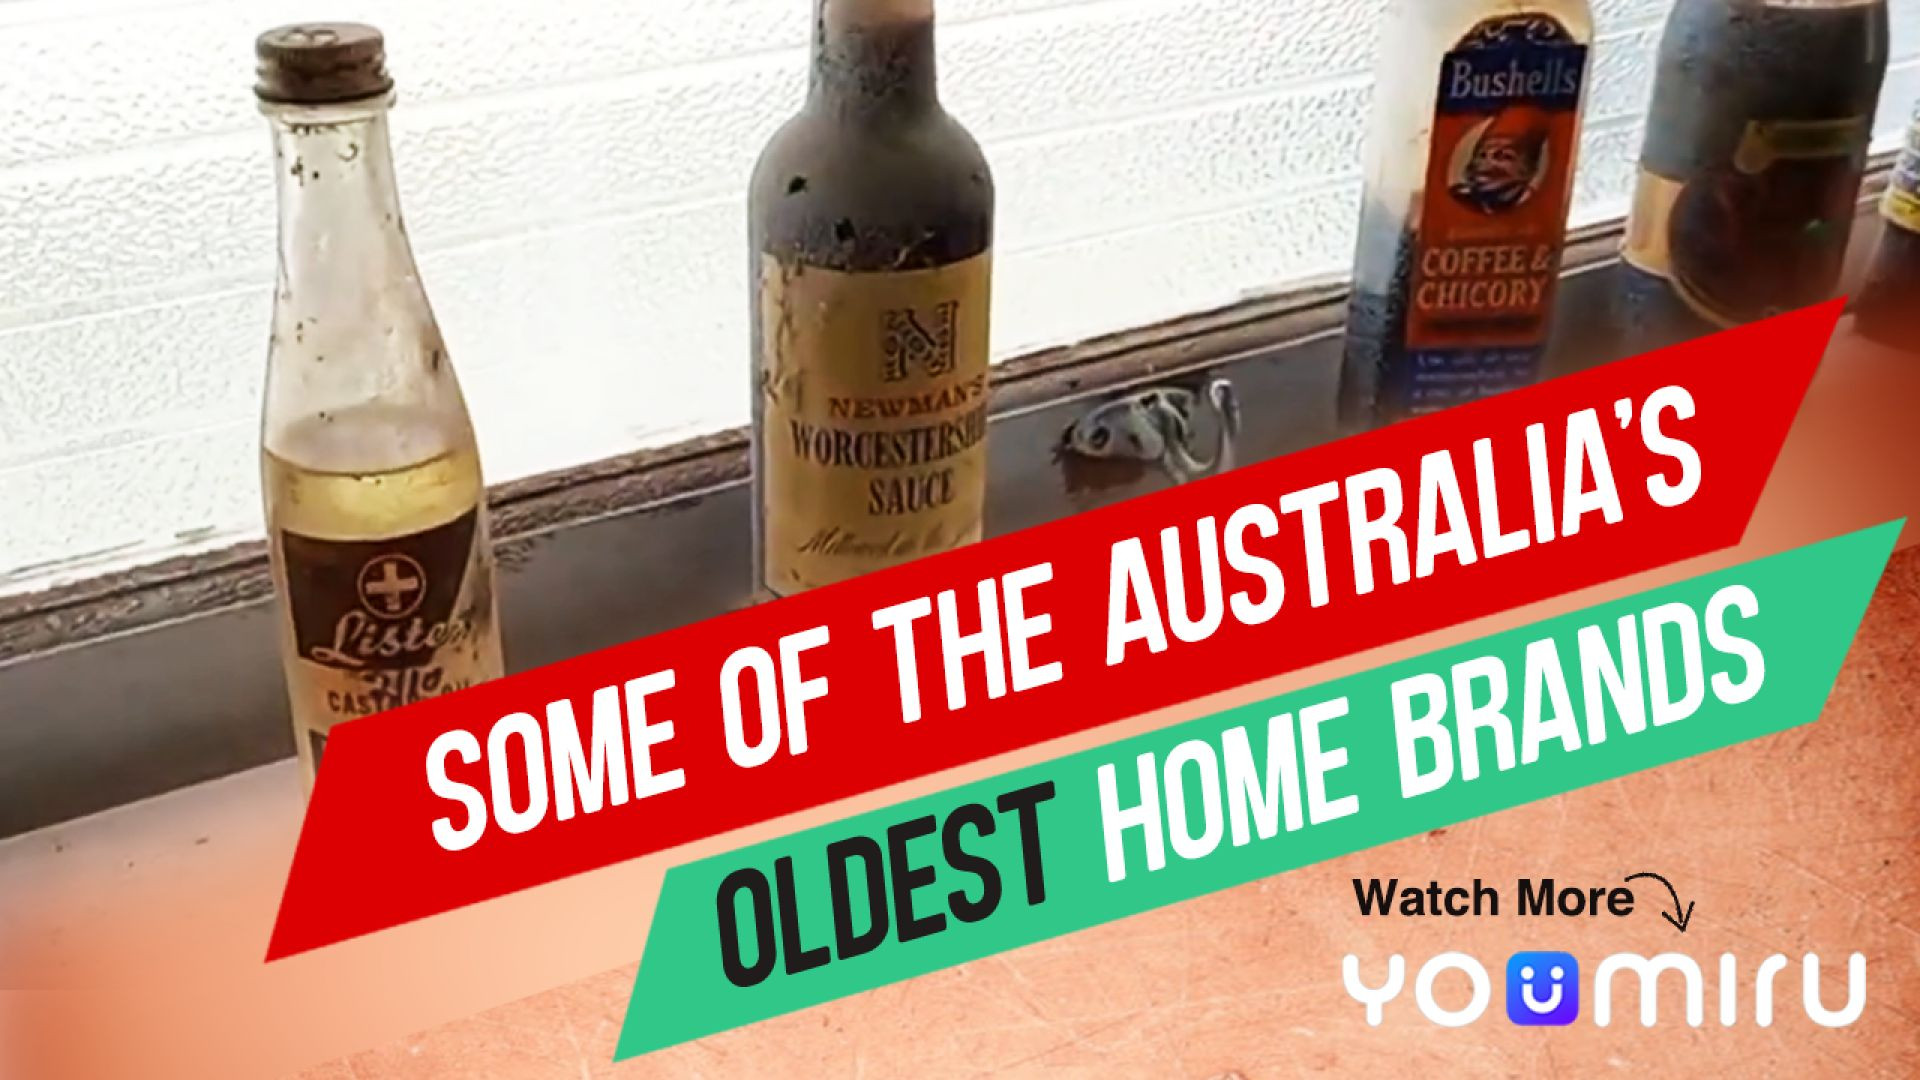 Some of the Australia's oldest home brands